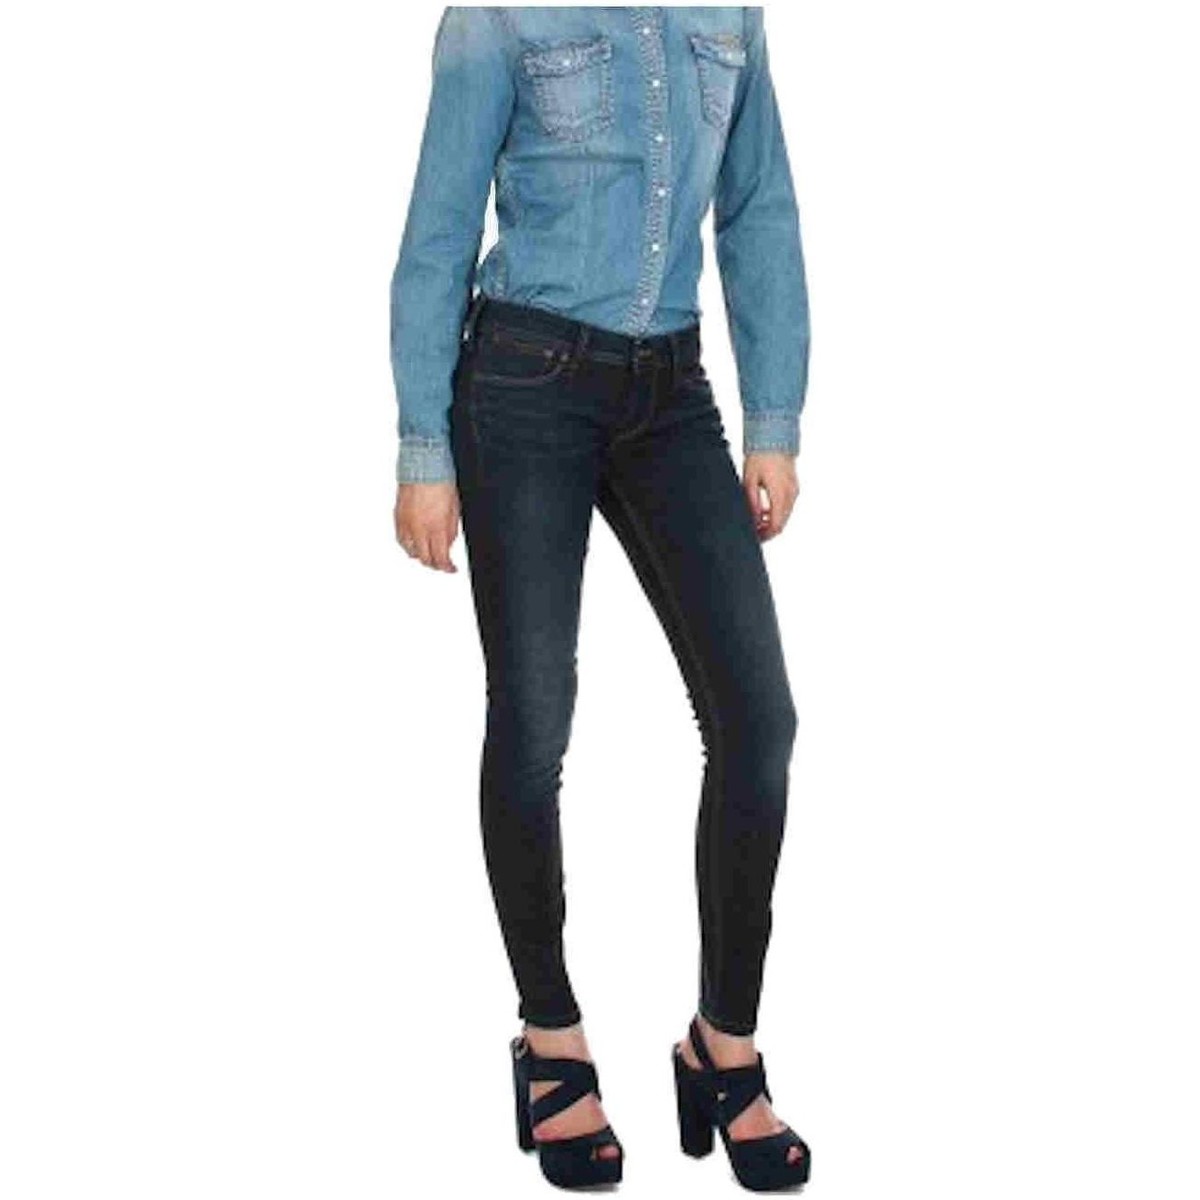 Pepe jeans  Jeans Pepe jeans -